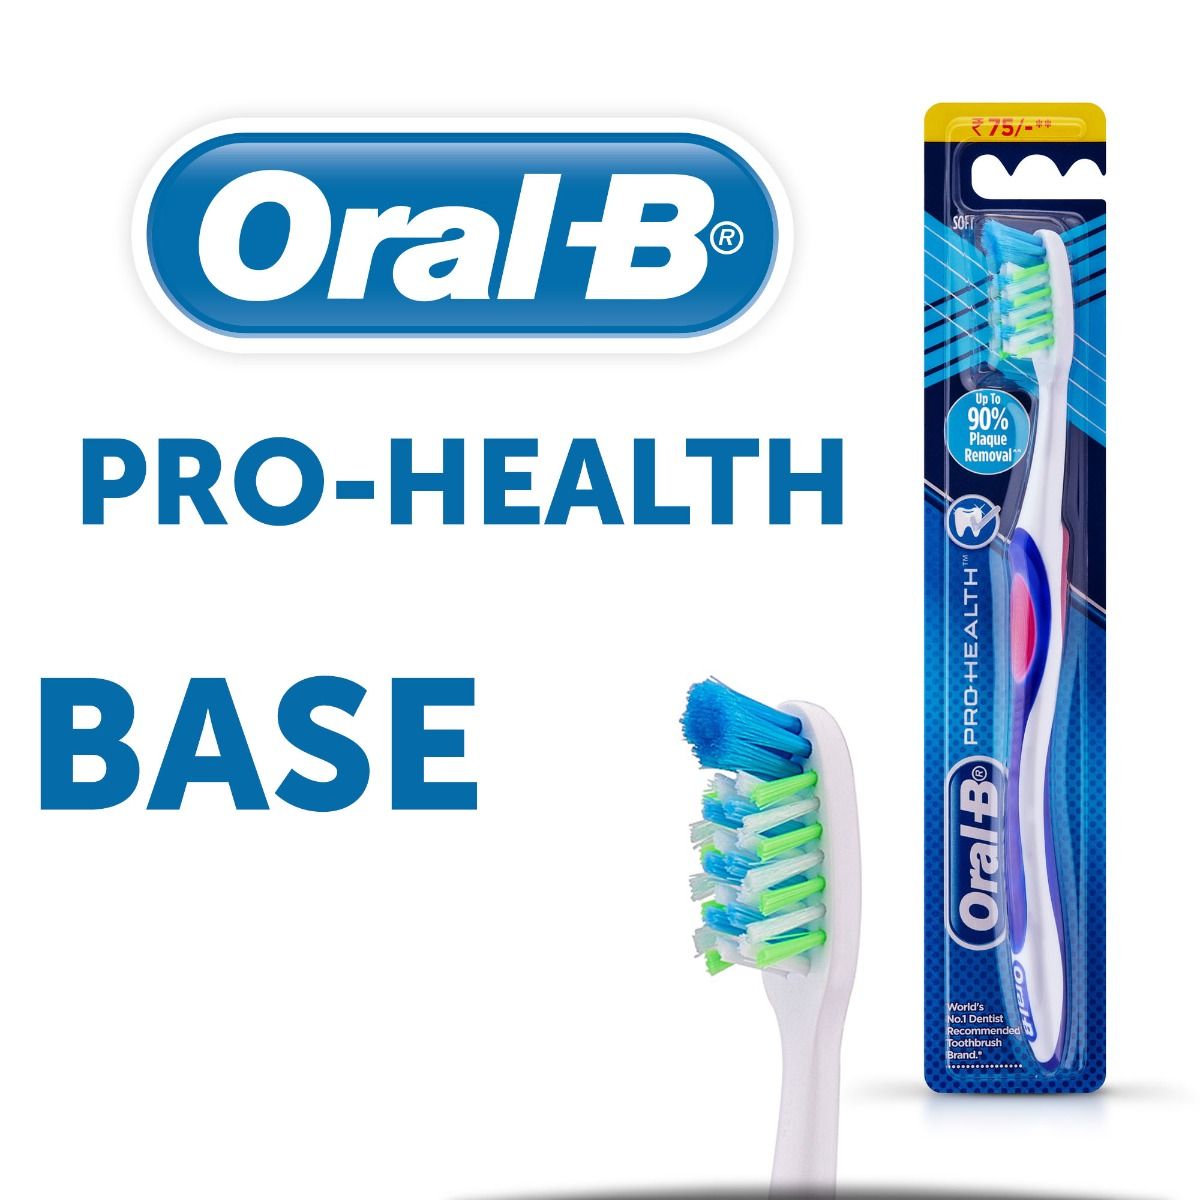 Buy Oral-B Pro-Health Base Soft Toothbrush, 1 Count Online